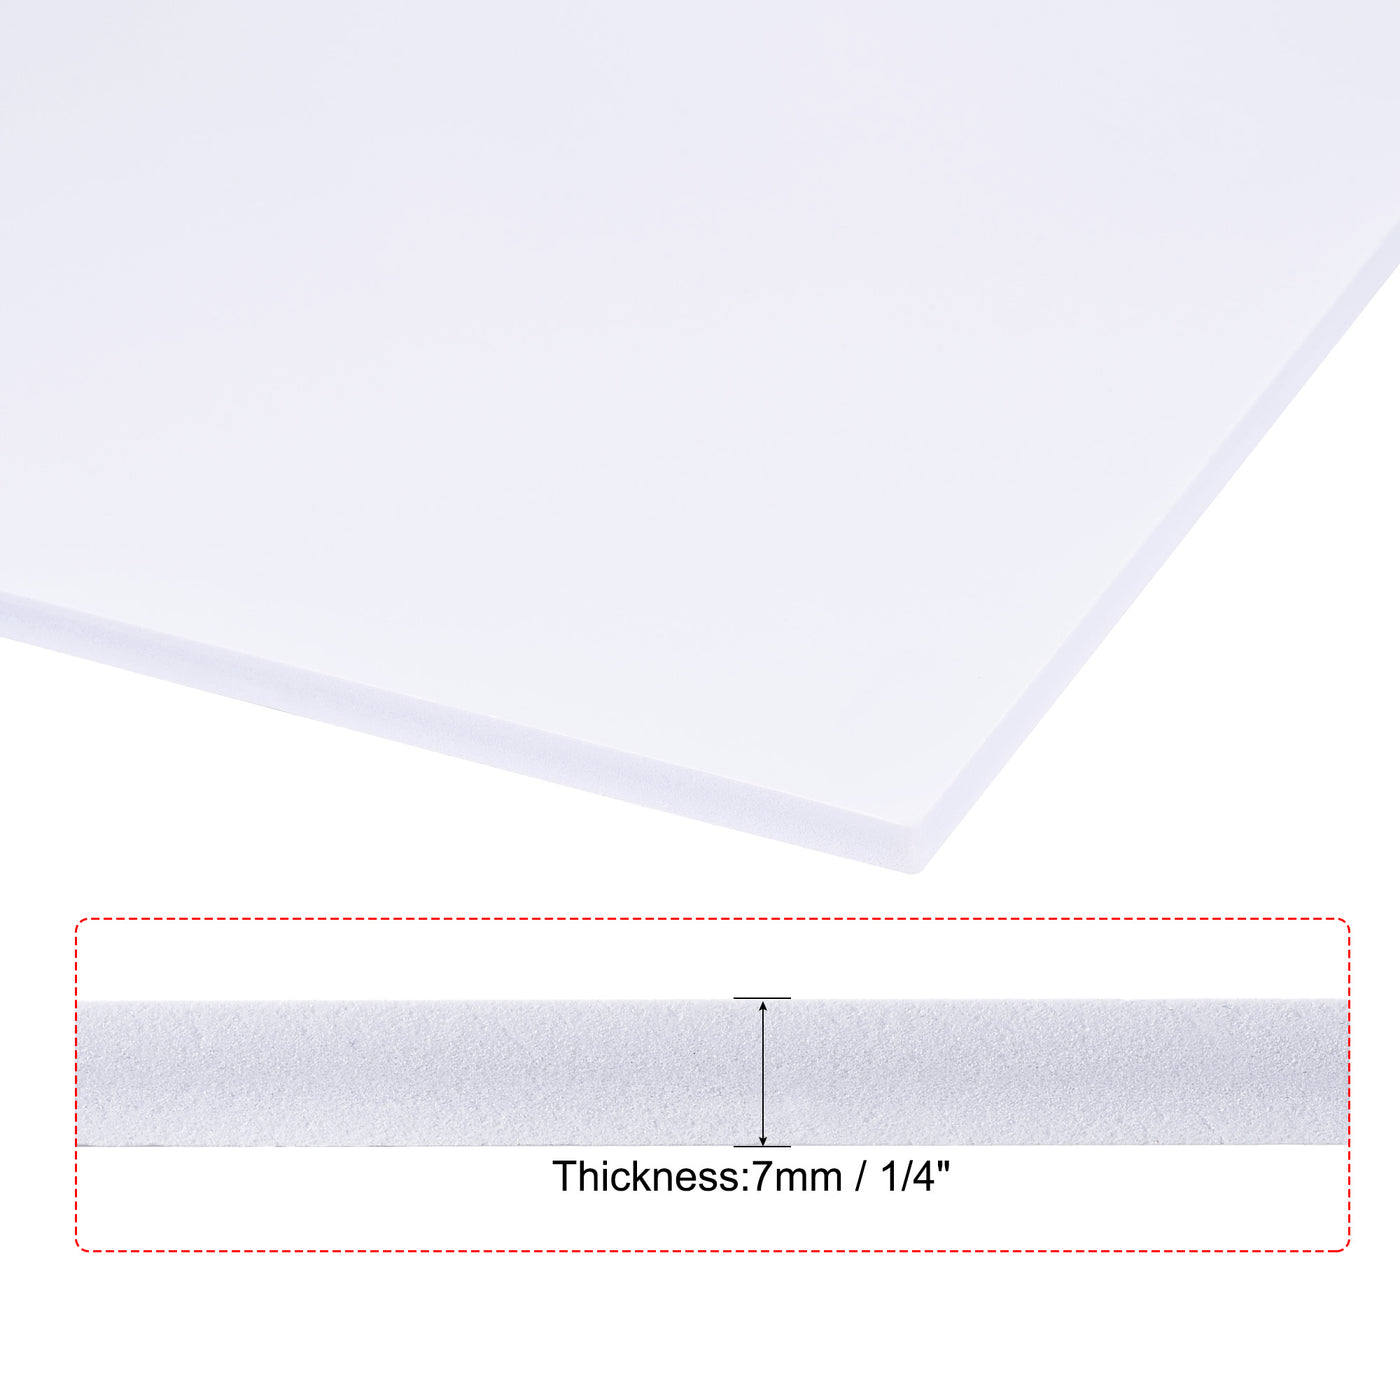 uxcell Uxcell PVC Foam Board Sheet,7mm x 300mm x 300mm,White,Double Sided,Expanded PVC Sheet